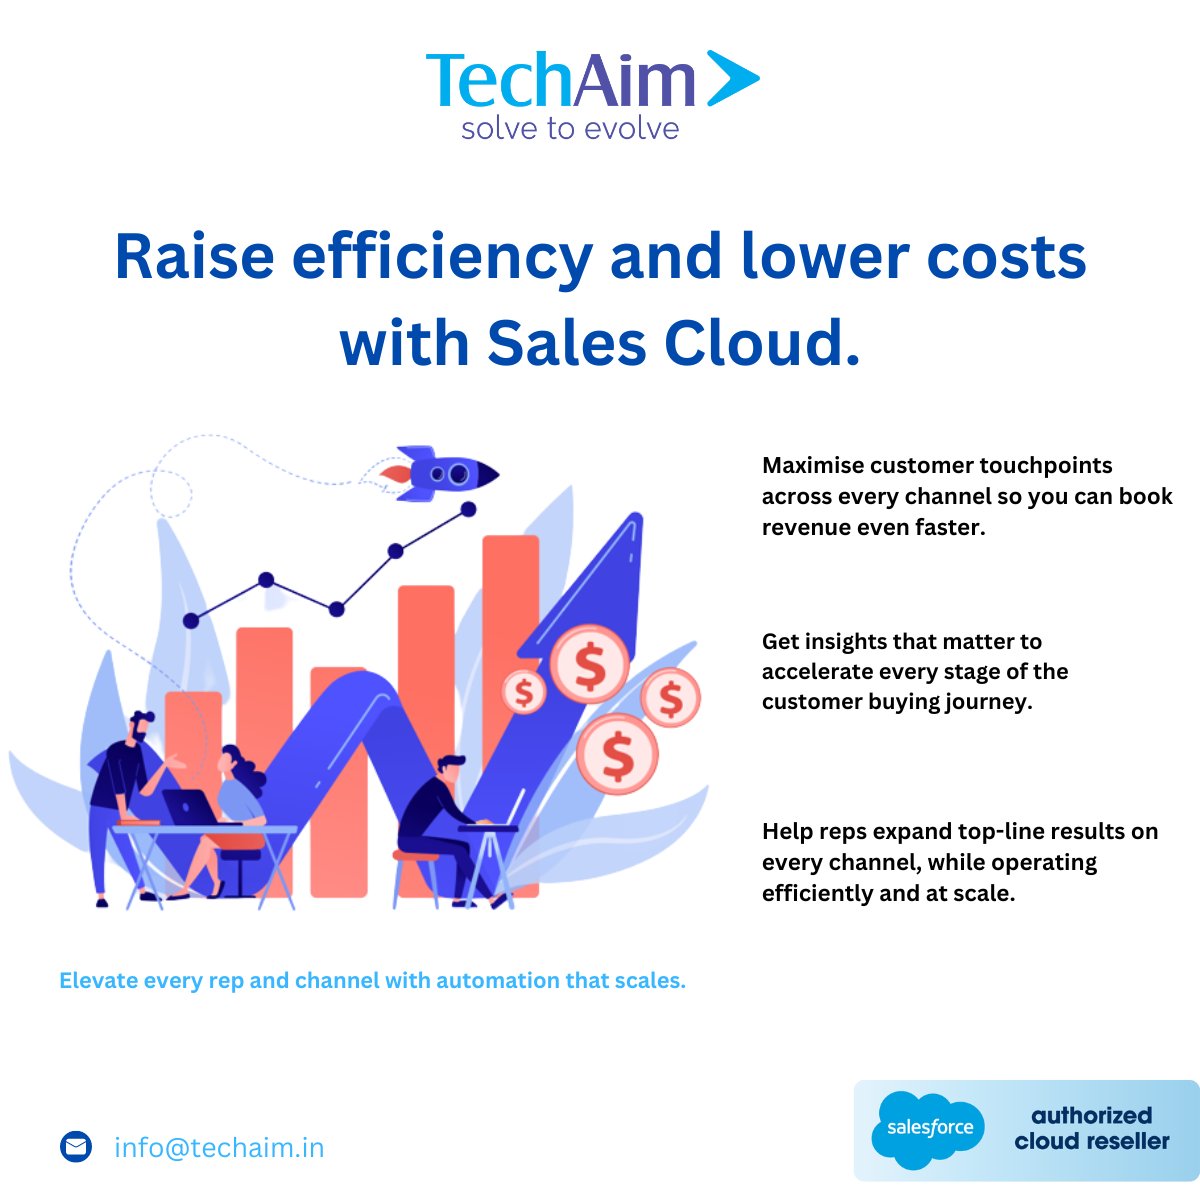 Streamline Your Sales Process and Boost Your Bottom Line with Sales Cloud: The Ultimate Tool for Business Growth.
#SalesCloud #Efficiency #techaim #CostReduction #BusinessGrowth #SalesProcess #Streamline #ProductivityBoost #BottomLine #CloudTechnology